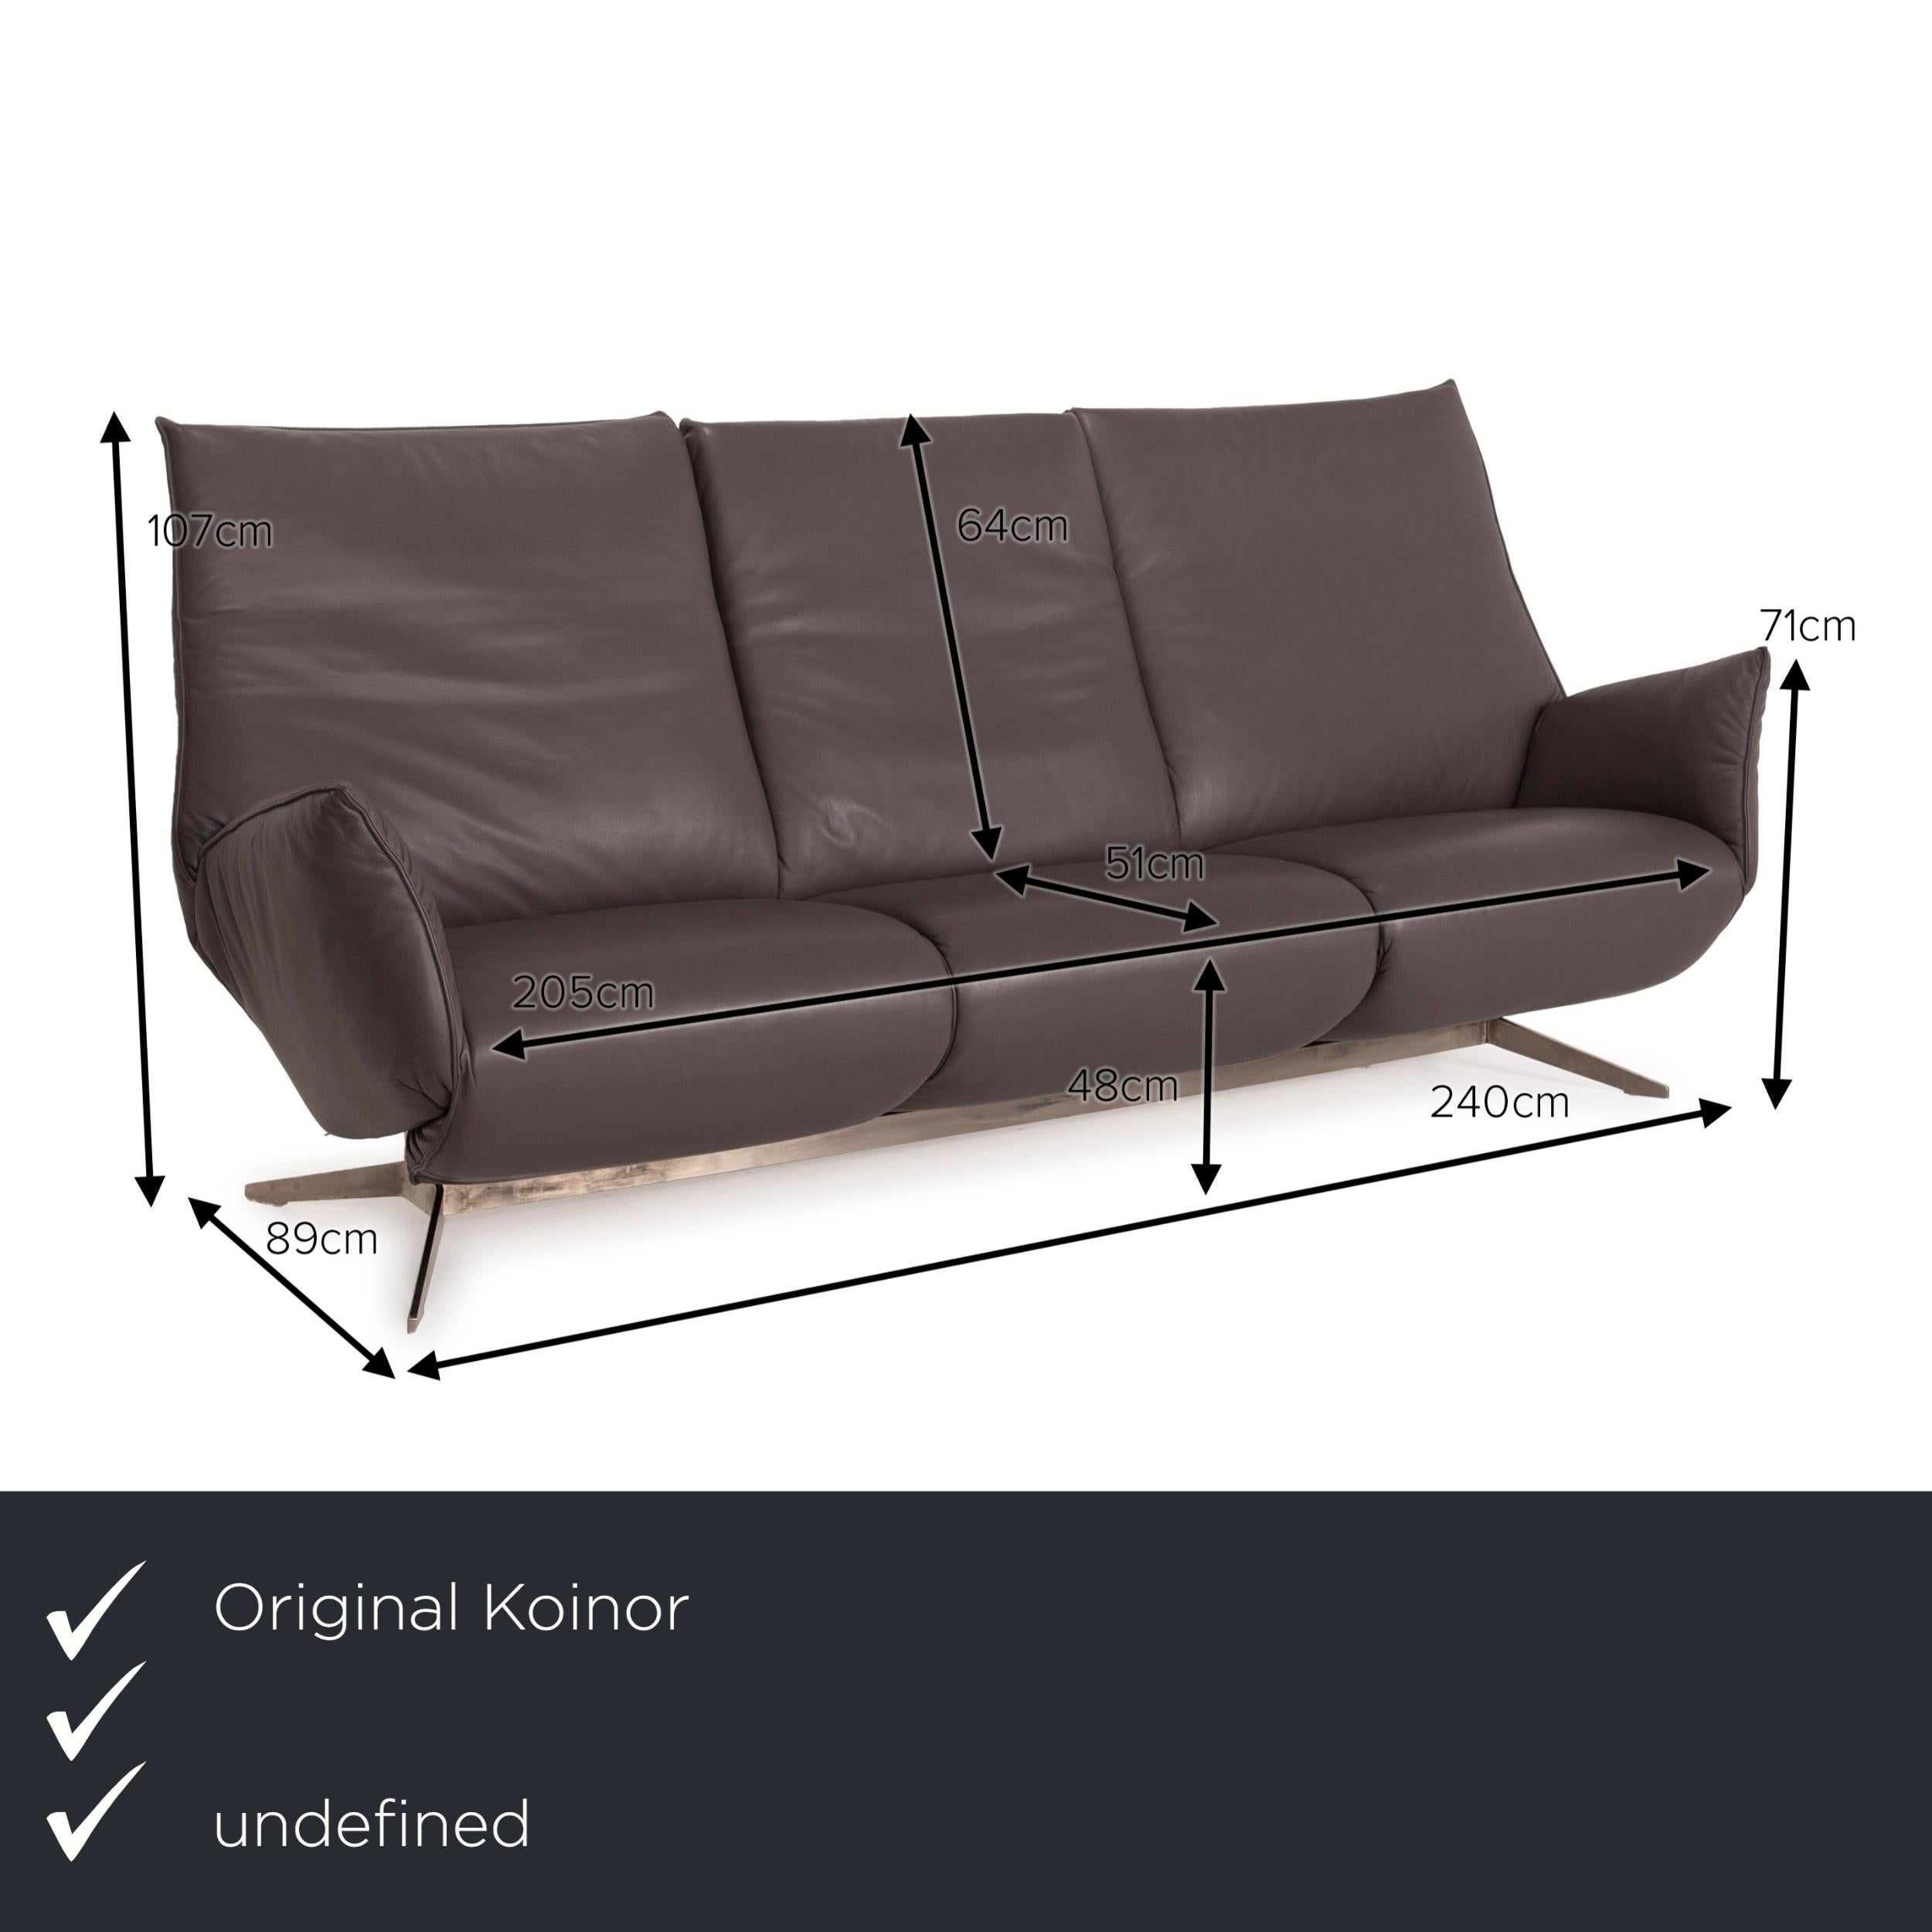 We present to you a Koinor Evita leather sofa set gray brown 1x three-seater 1x stool.


 Product measurements in centimeters:
 

Depth: 89
Width: 240
Height: 107
Seat height: 48
Rest height: 71
Seat depth: 51
Seat width: 205
Back